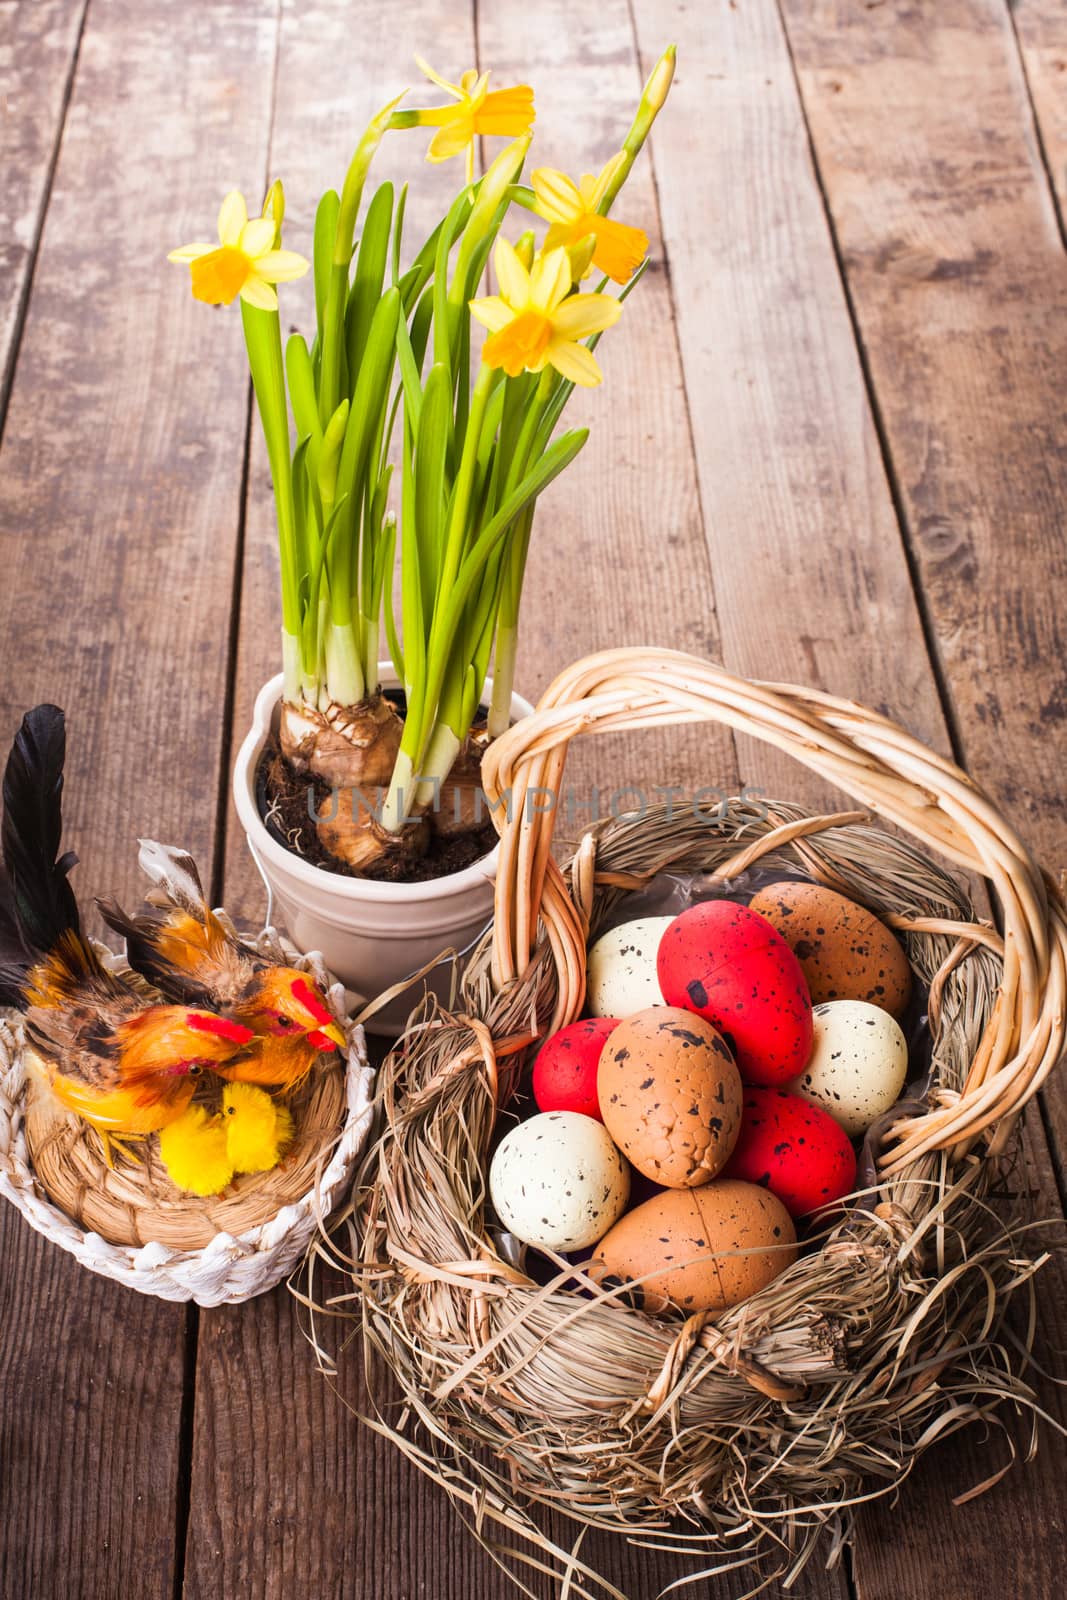 Brown, red and yellow eggs in basket, Easter decor